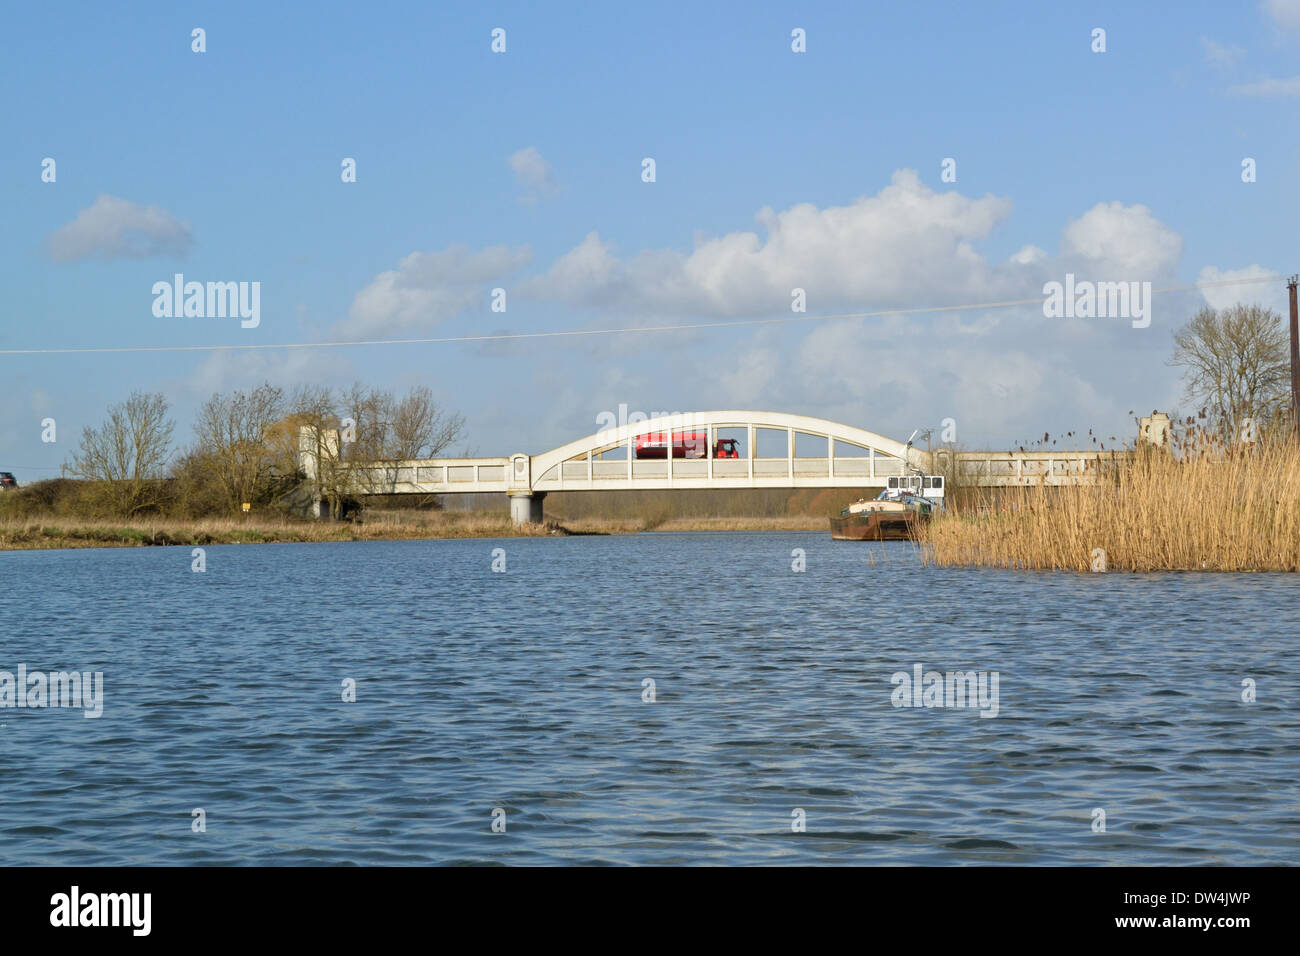 Dimmock's Cote Bridge carrying the A1123 road over the River Cam, Cambridgeshire, UK Stock Photo